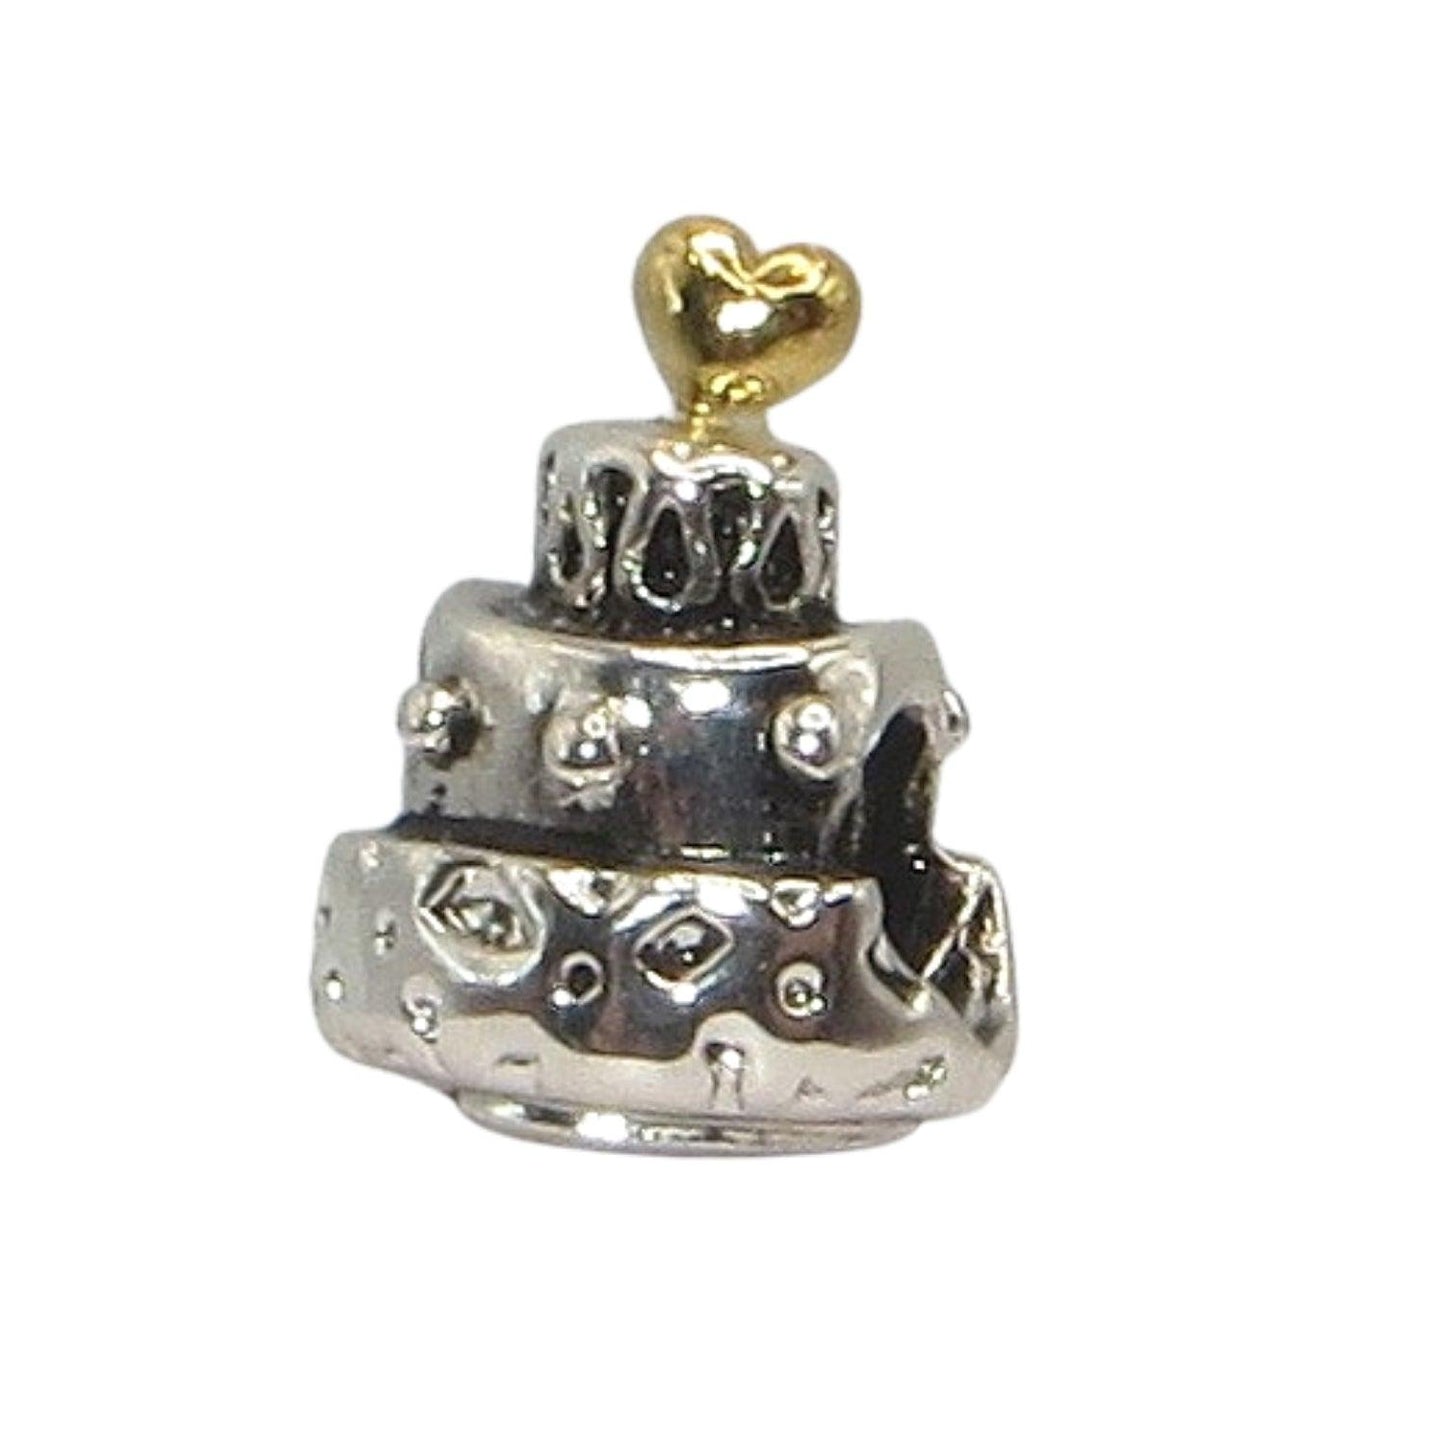 PANDORA 790347 Celebration Cake - 3-Tier Sterling Silver Cake Decorated with 14k Gold Heart - Women's - Charm - Charming Jilly